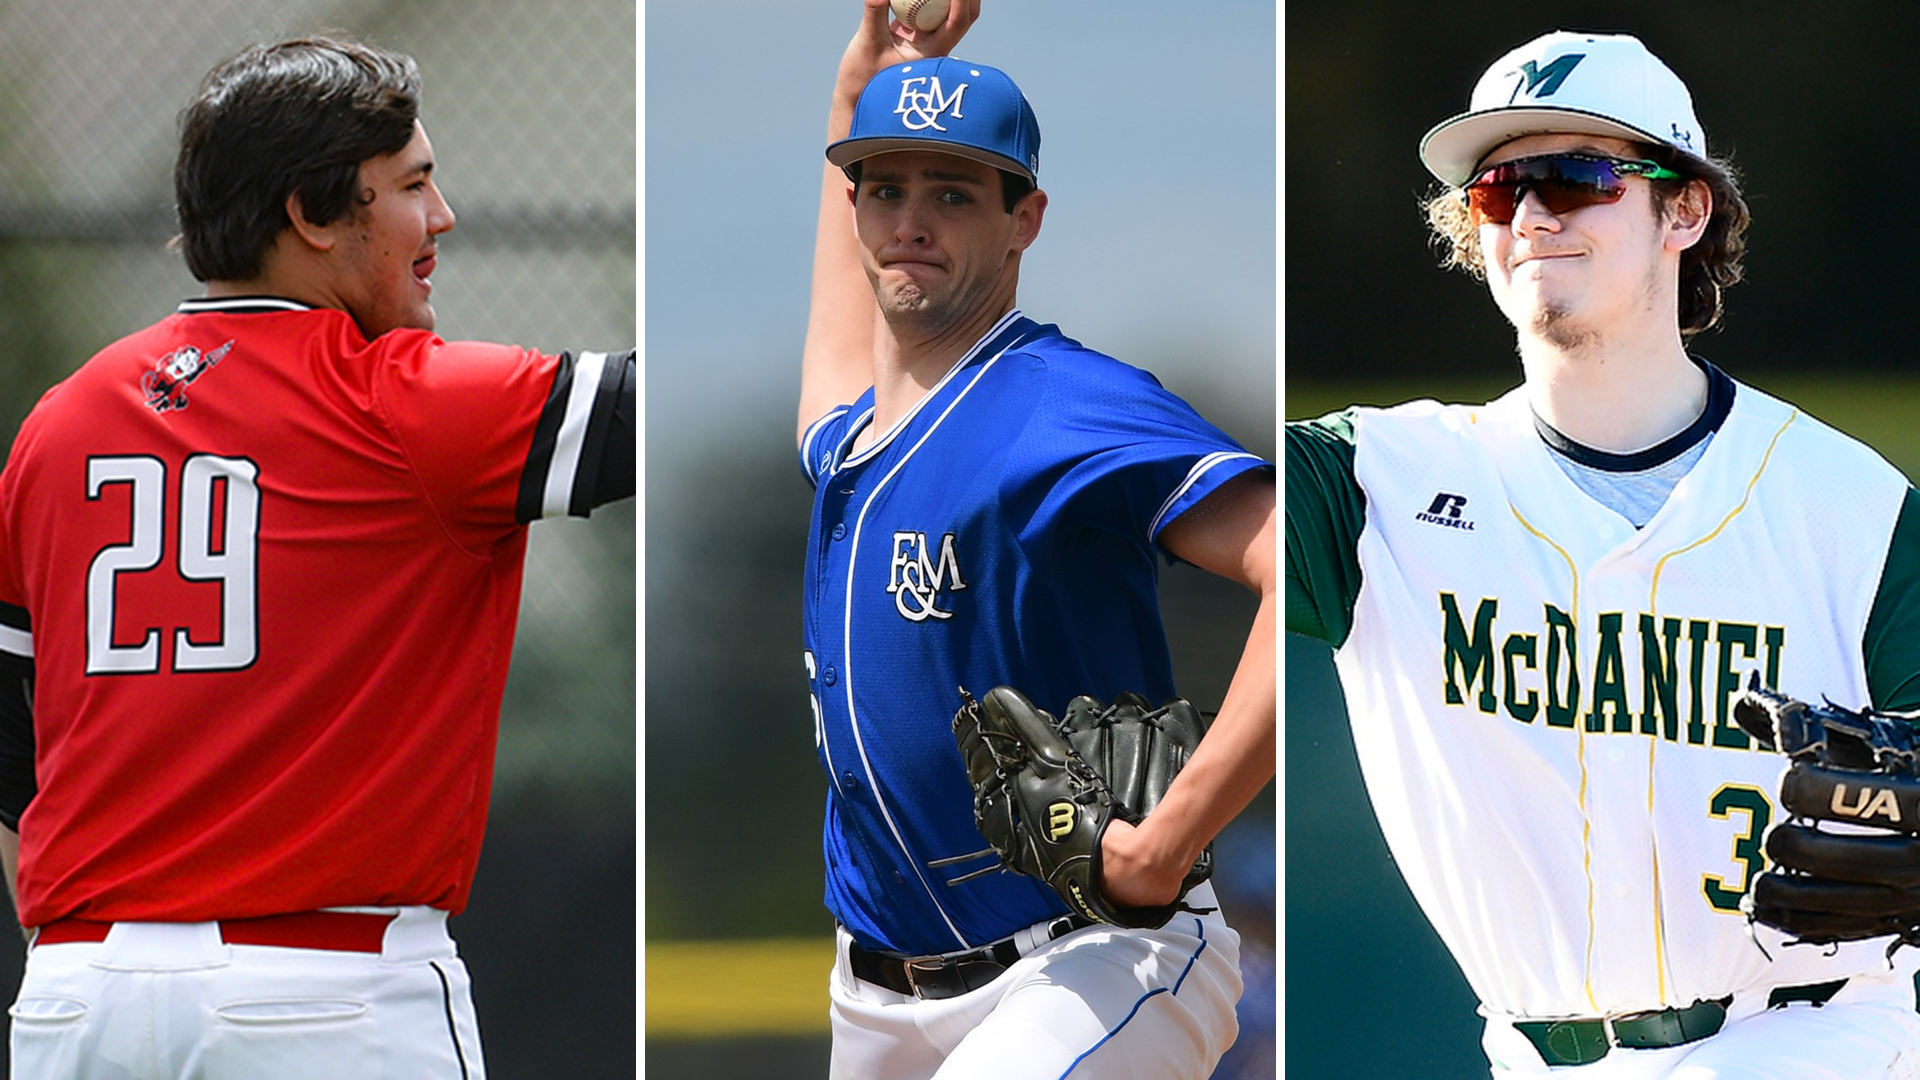 F&M's Roche Named D3Baseball.com Mid-Atlantic Pitcher of the Year; Three from CC Honored